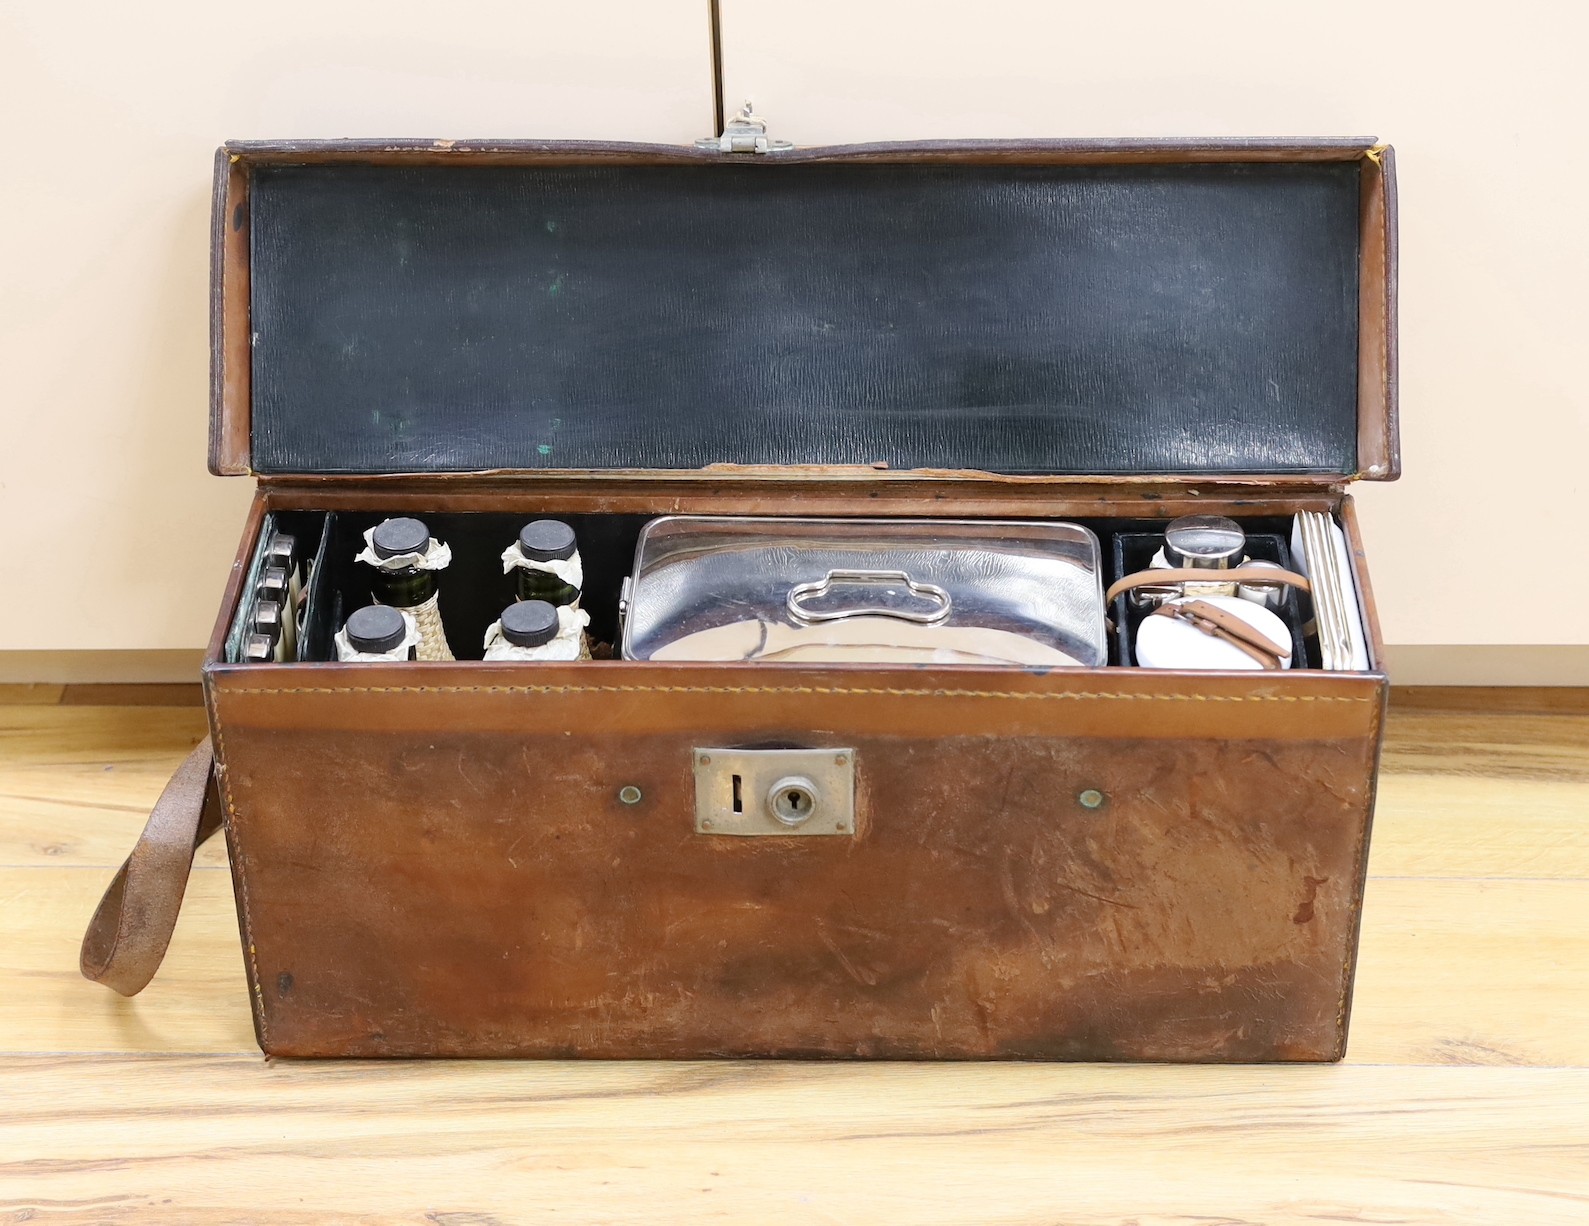 Automobilia related - an early leather cased car picnic hamper, with enamelled plates, basket work covered glass bottles and tumblers and plated cutlery